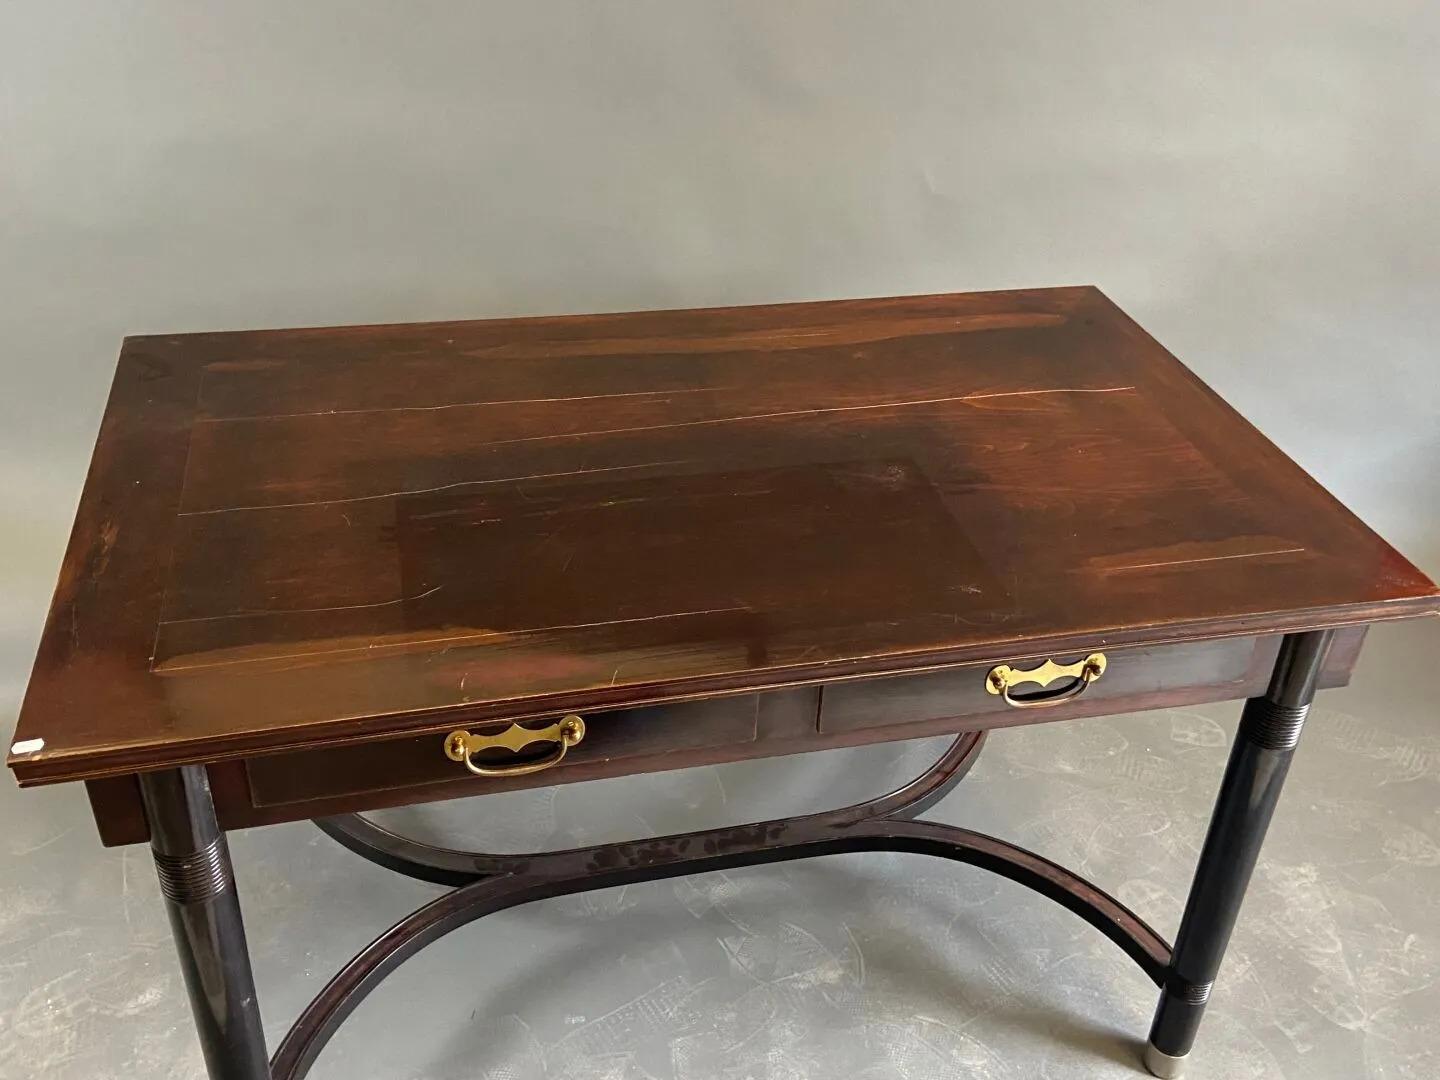 Art Nouveau desk in walnut , Viennese Secession, circa 1900
patina to be redone, small lack of plating